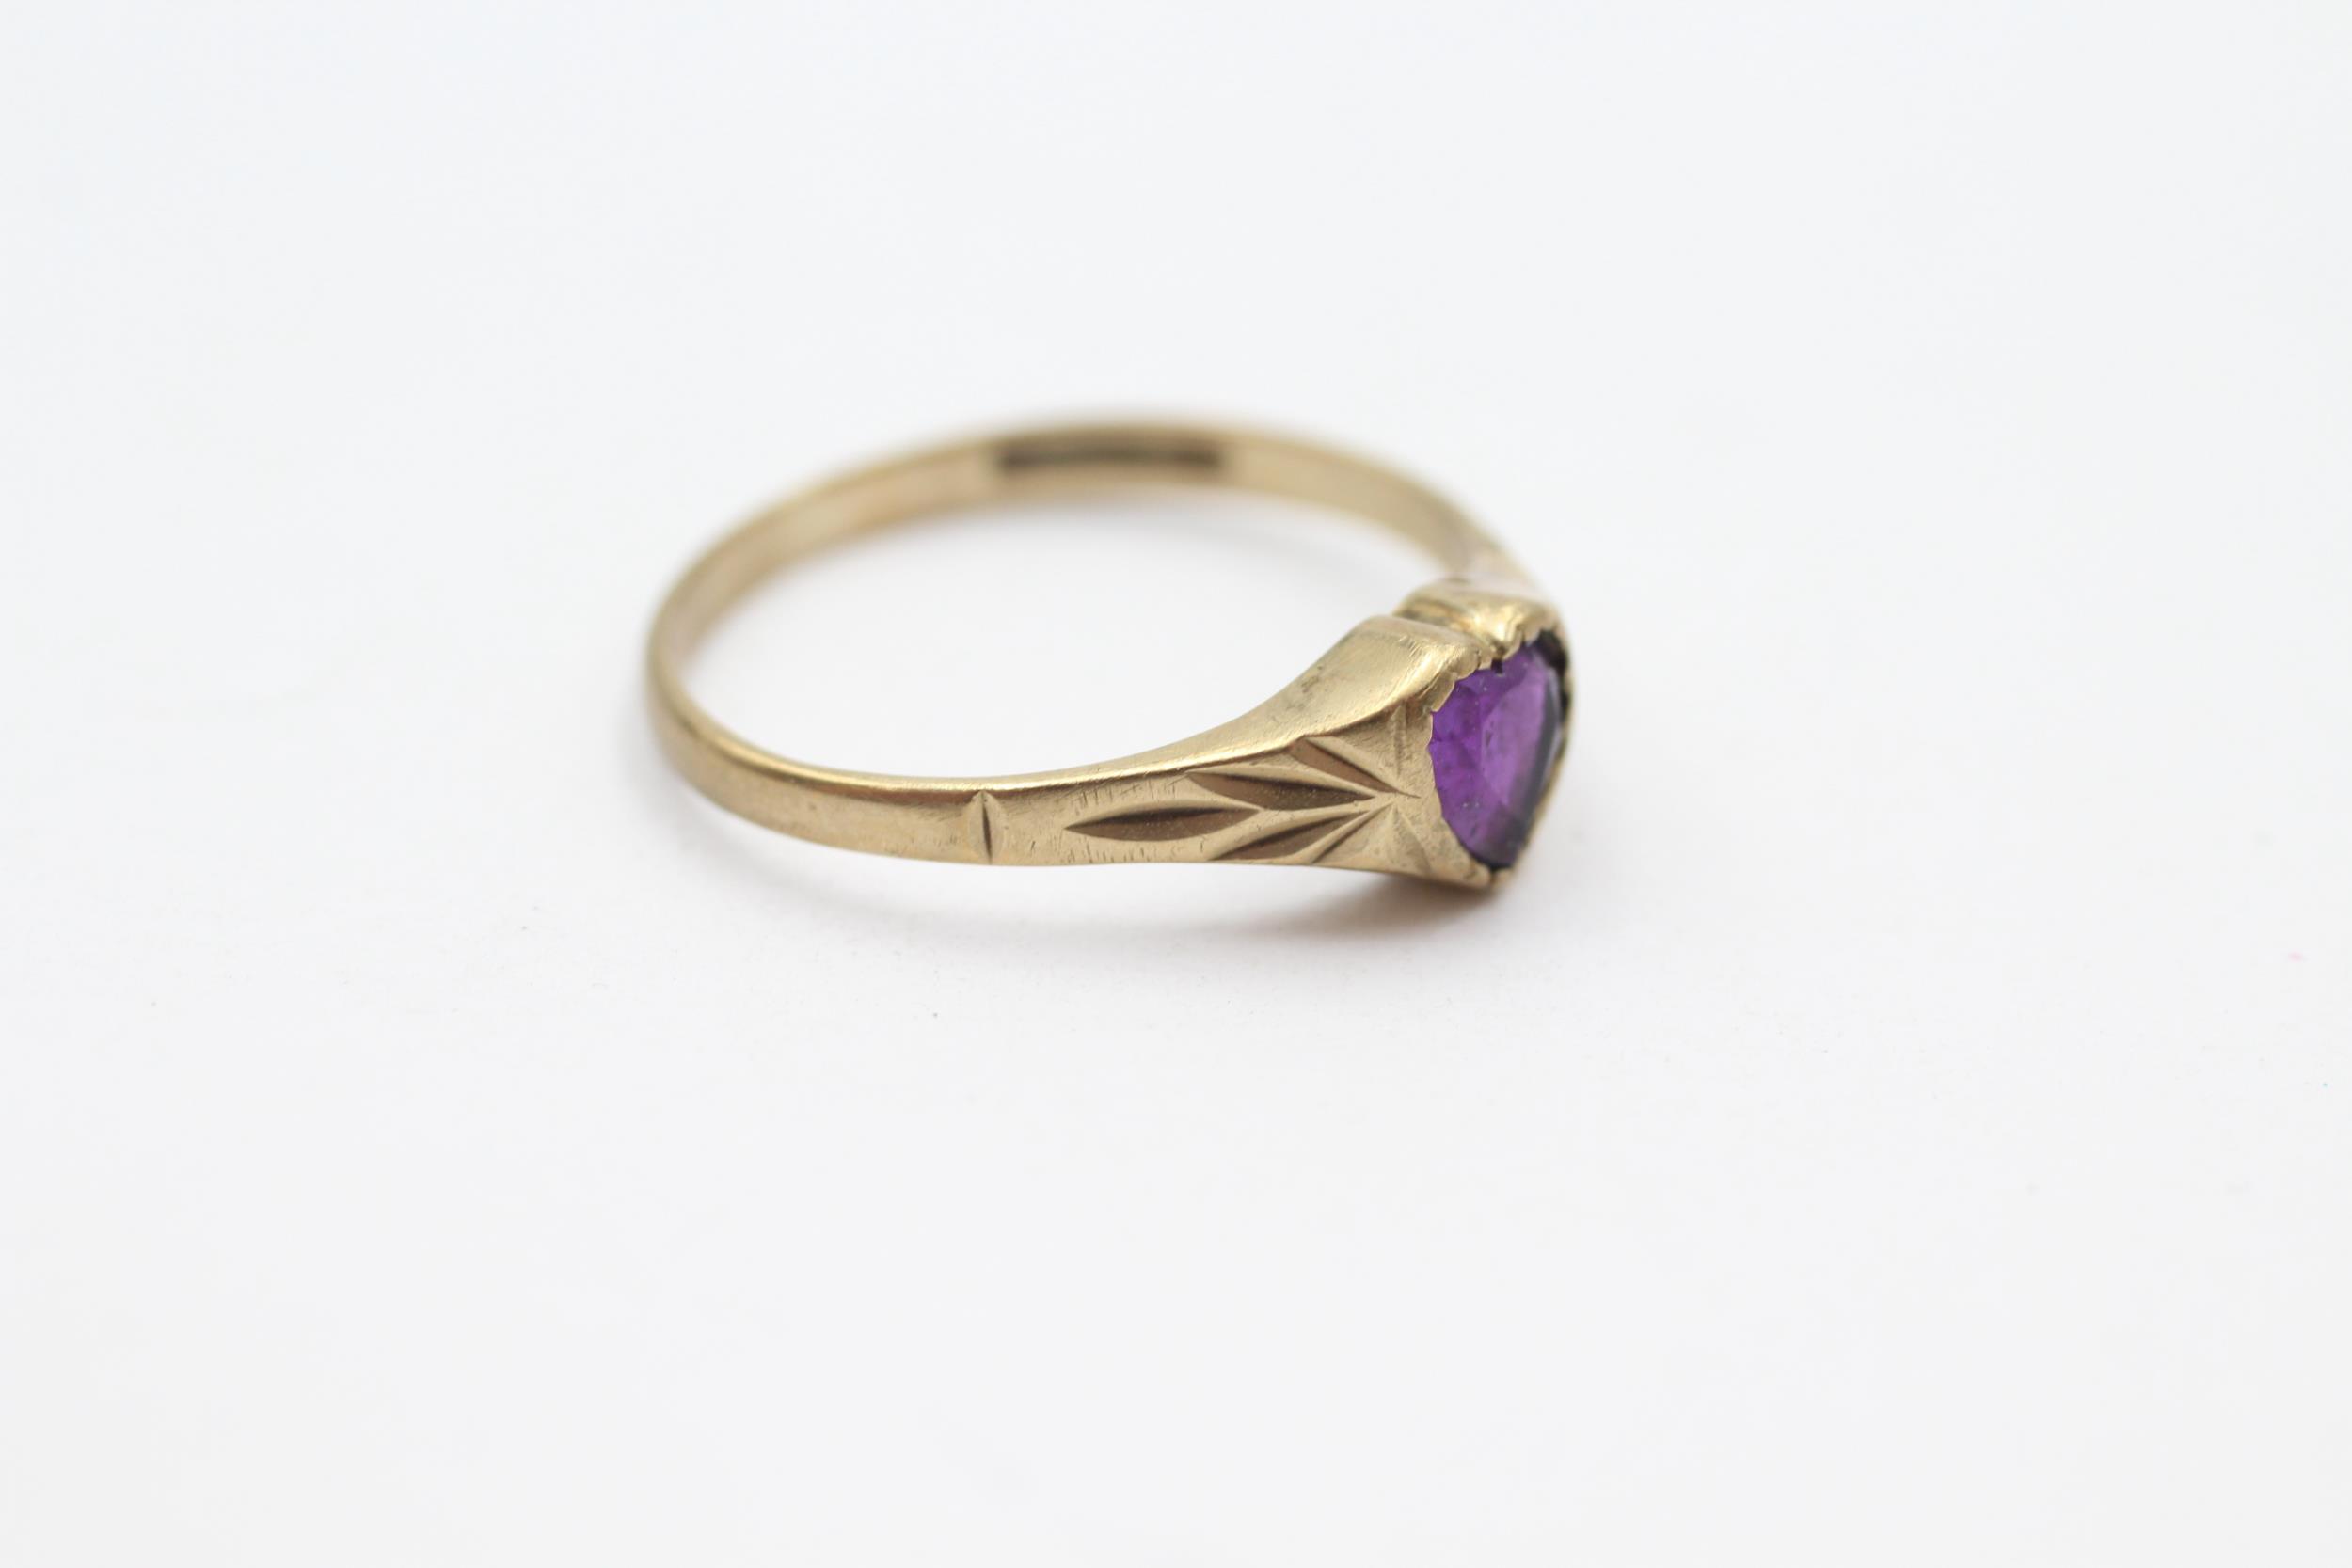 9ct gold heart amethyst single stone ring with engraved shoulders - MISHAPEN - AS SEEN Size K - 1. - Image 2 of 4